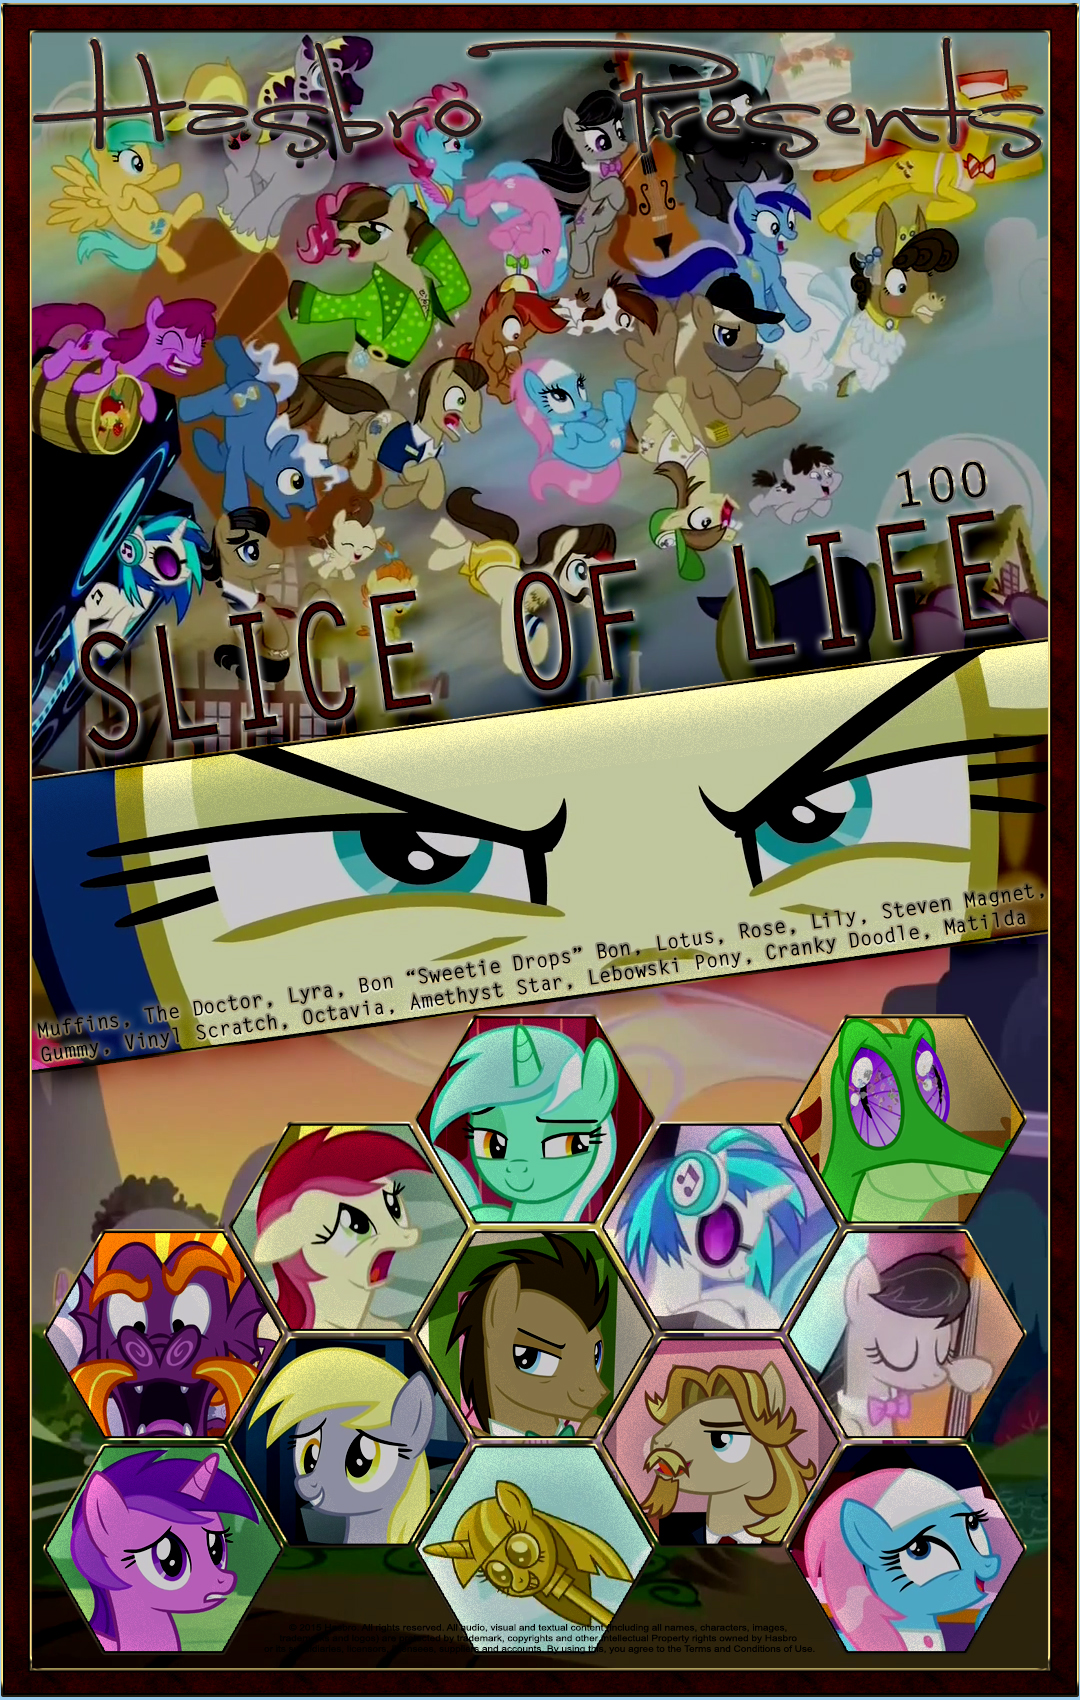 mlp___slice_of_life___movie_poster_by_pims1978-d8x8st1.jpg